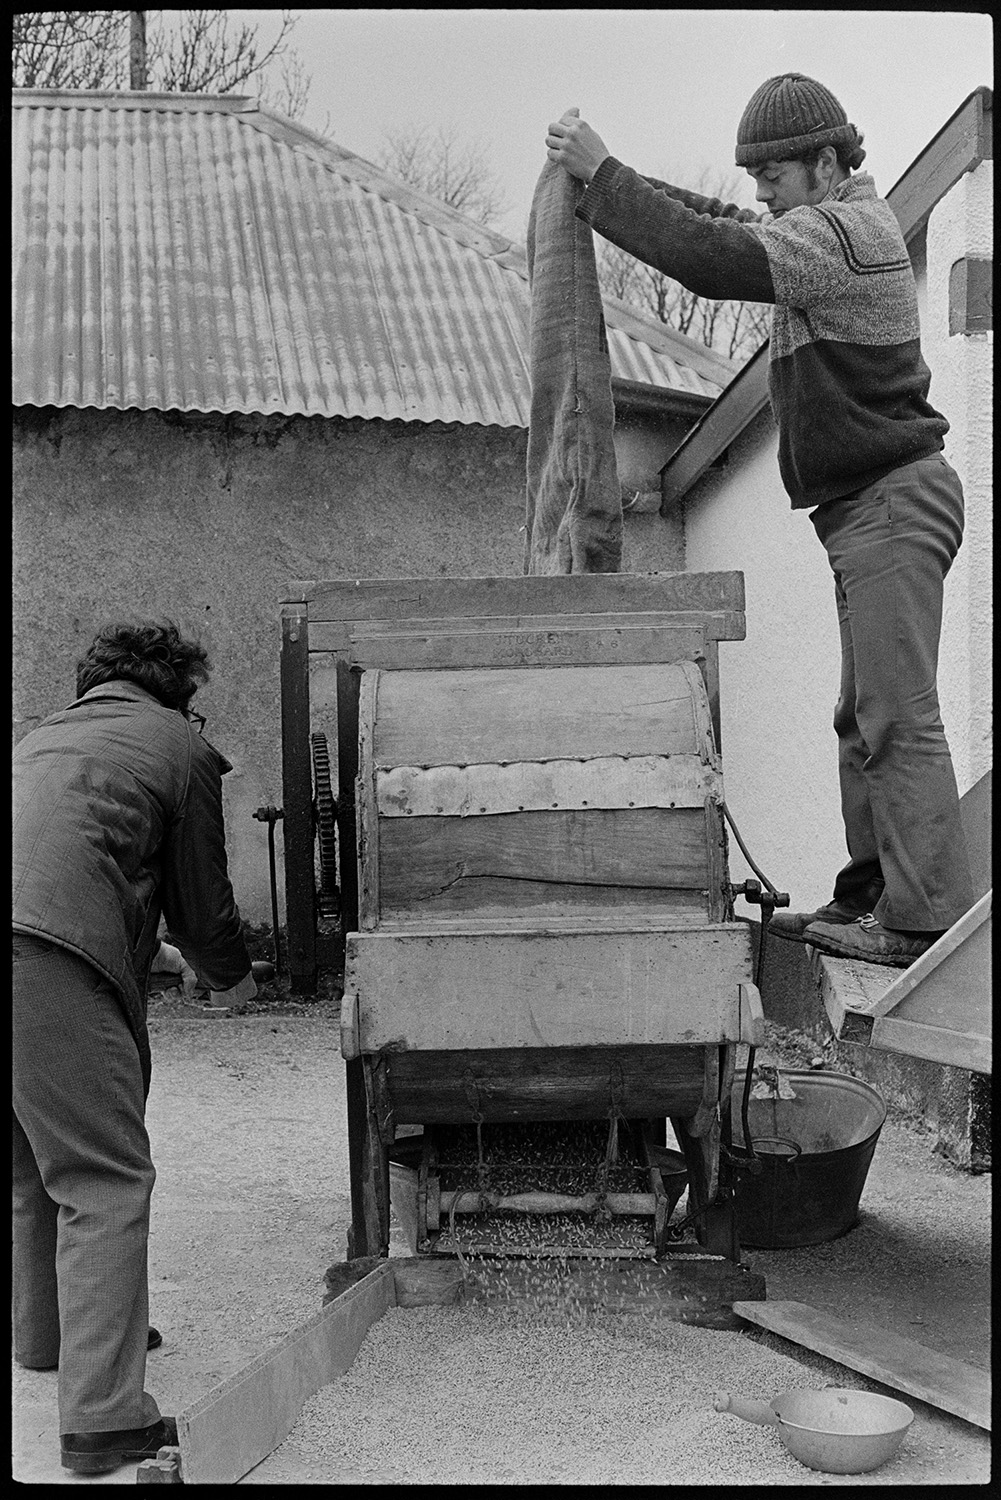 Men operating old crusher, hand operated. 
[David or Graham Ward and another man using a grain crusher in the farmyard at Parsonage, Iddesleigh. One man is emptying a sack of grain into the crusher and the other man is operating the crusher by turning a handle.]